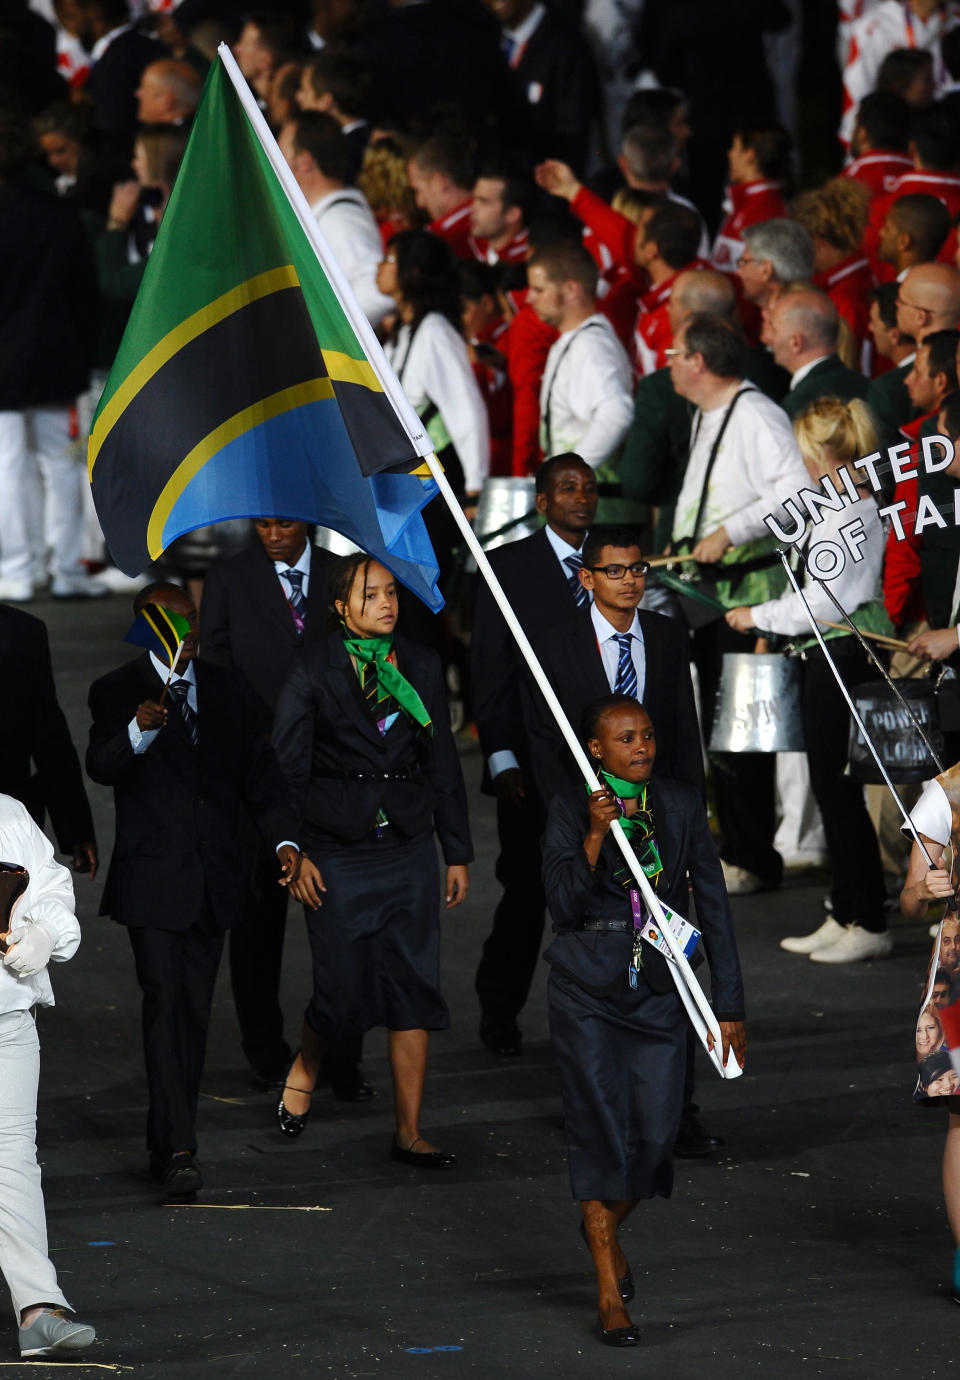 LONDON, ENGLAND - JULY 27: Zakia Mrisho of the United Republic of Tanzania Olympic team carries her country's flag during the Opening Ceremony of the London 2012 Olympic Games at the Olympic Stadium on July 27, 2012 in London, England. (Photo by Laurence Griffiths/Getty Images)